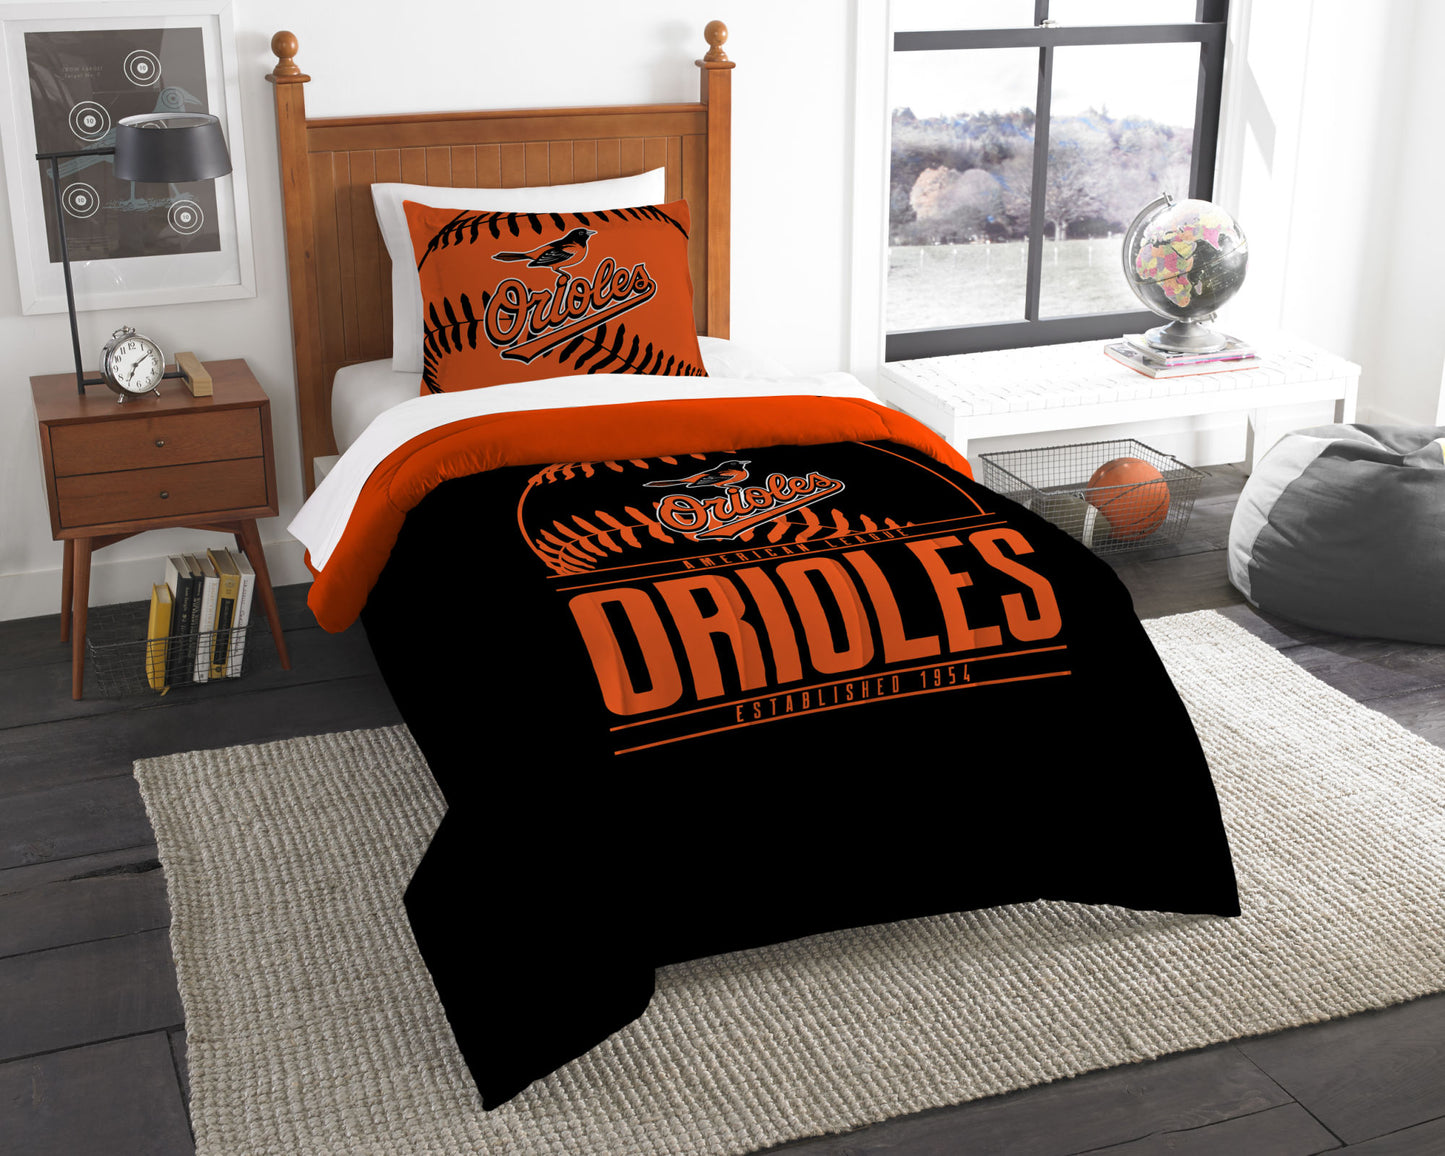 Orioles OFFICIAL MLB Bedding, Printed Twin Comforter (64"x 86") & 1 Sham (24"x 30") Set